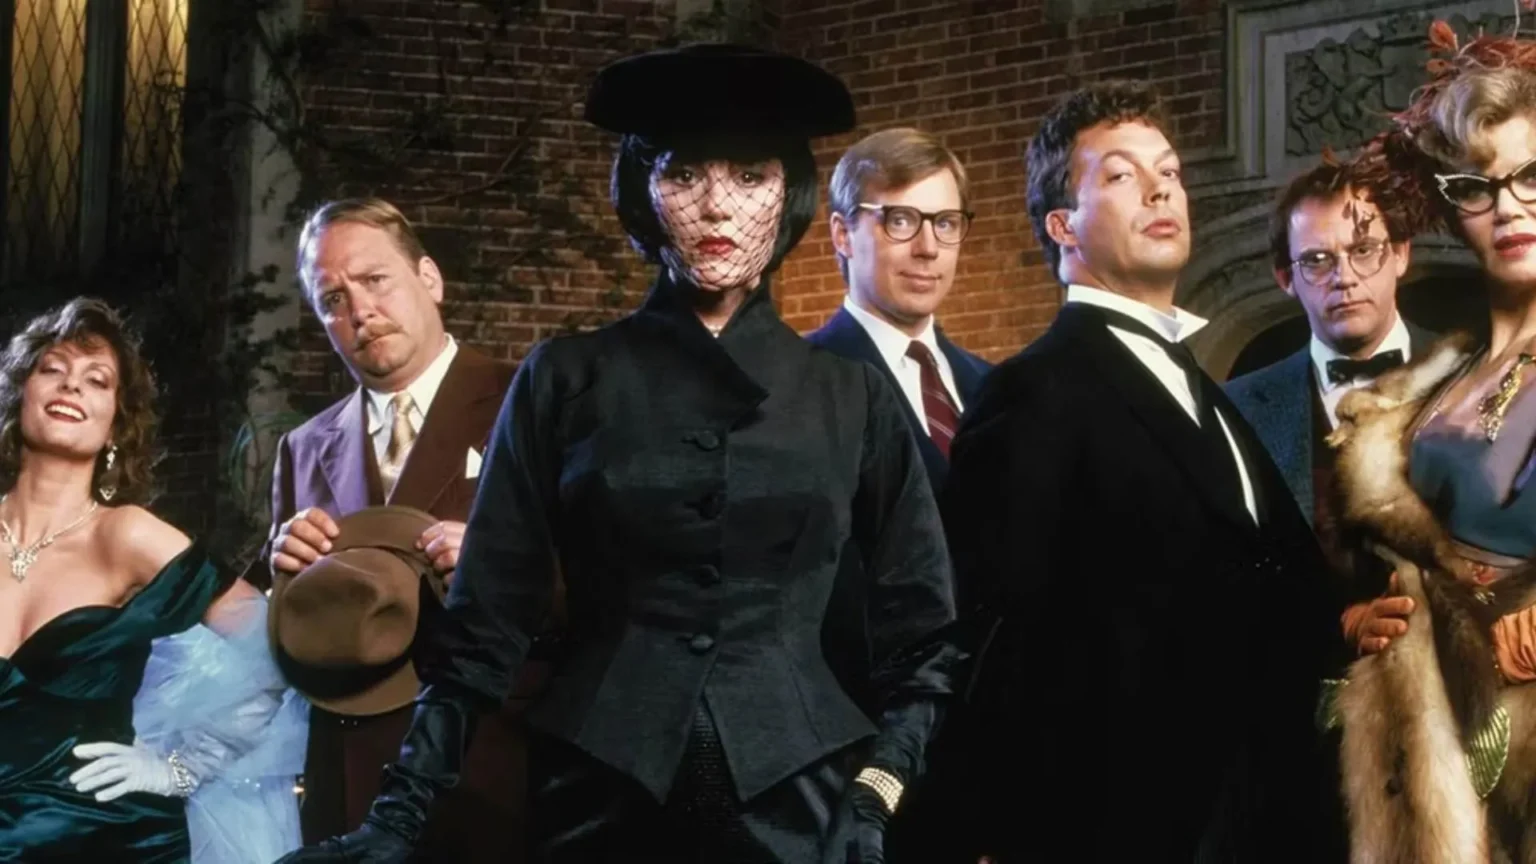 ‘Clue’ Franchise in the Works Sony and Hasbro Team Up for Film and TV Adaptations